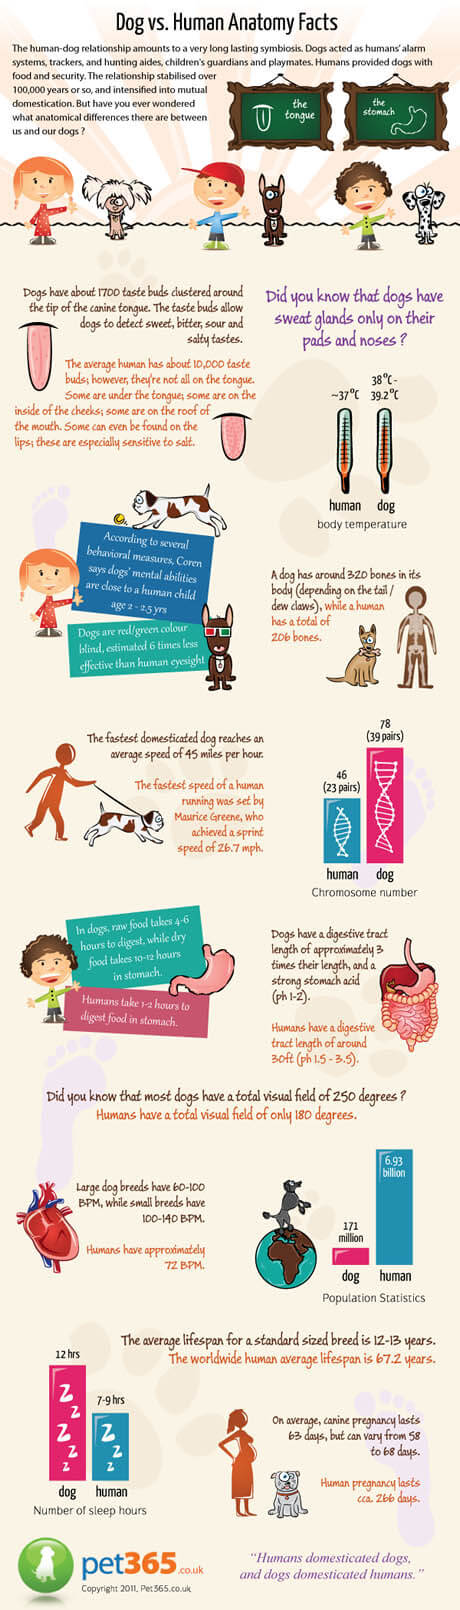 DOG VS HUMAN ANATOMY INFOGRAPHICS - PRESS TO SEE IN FULL SIZE !!!